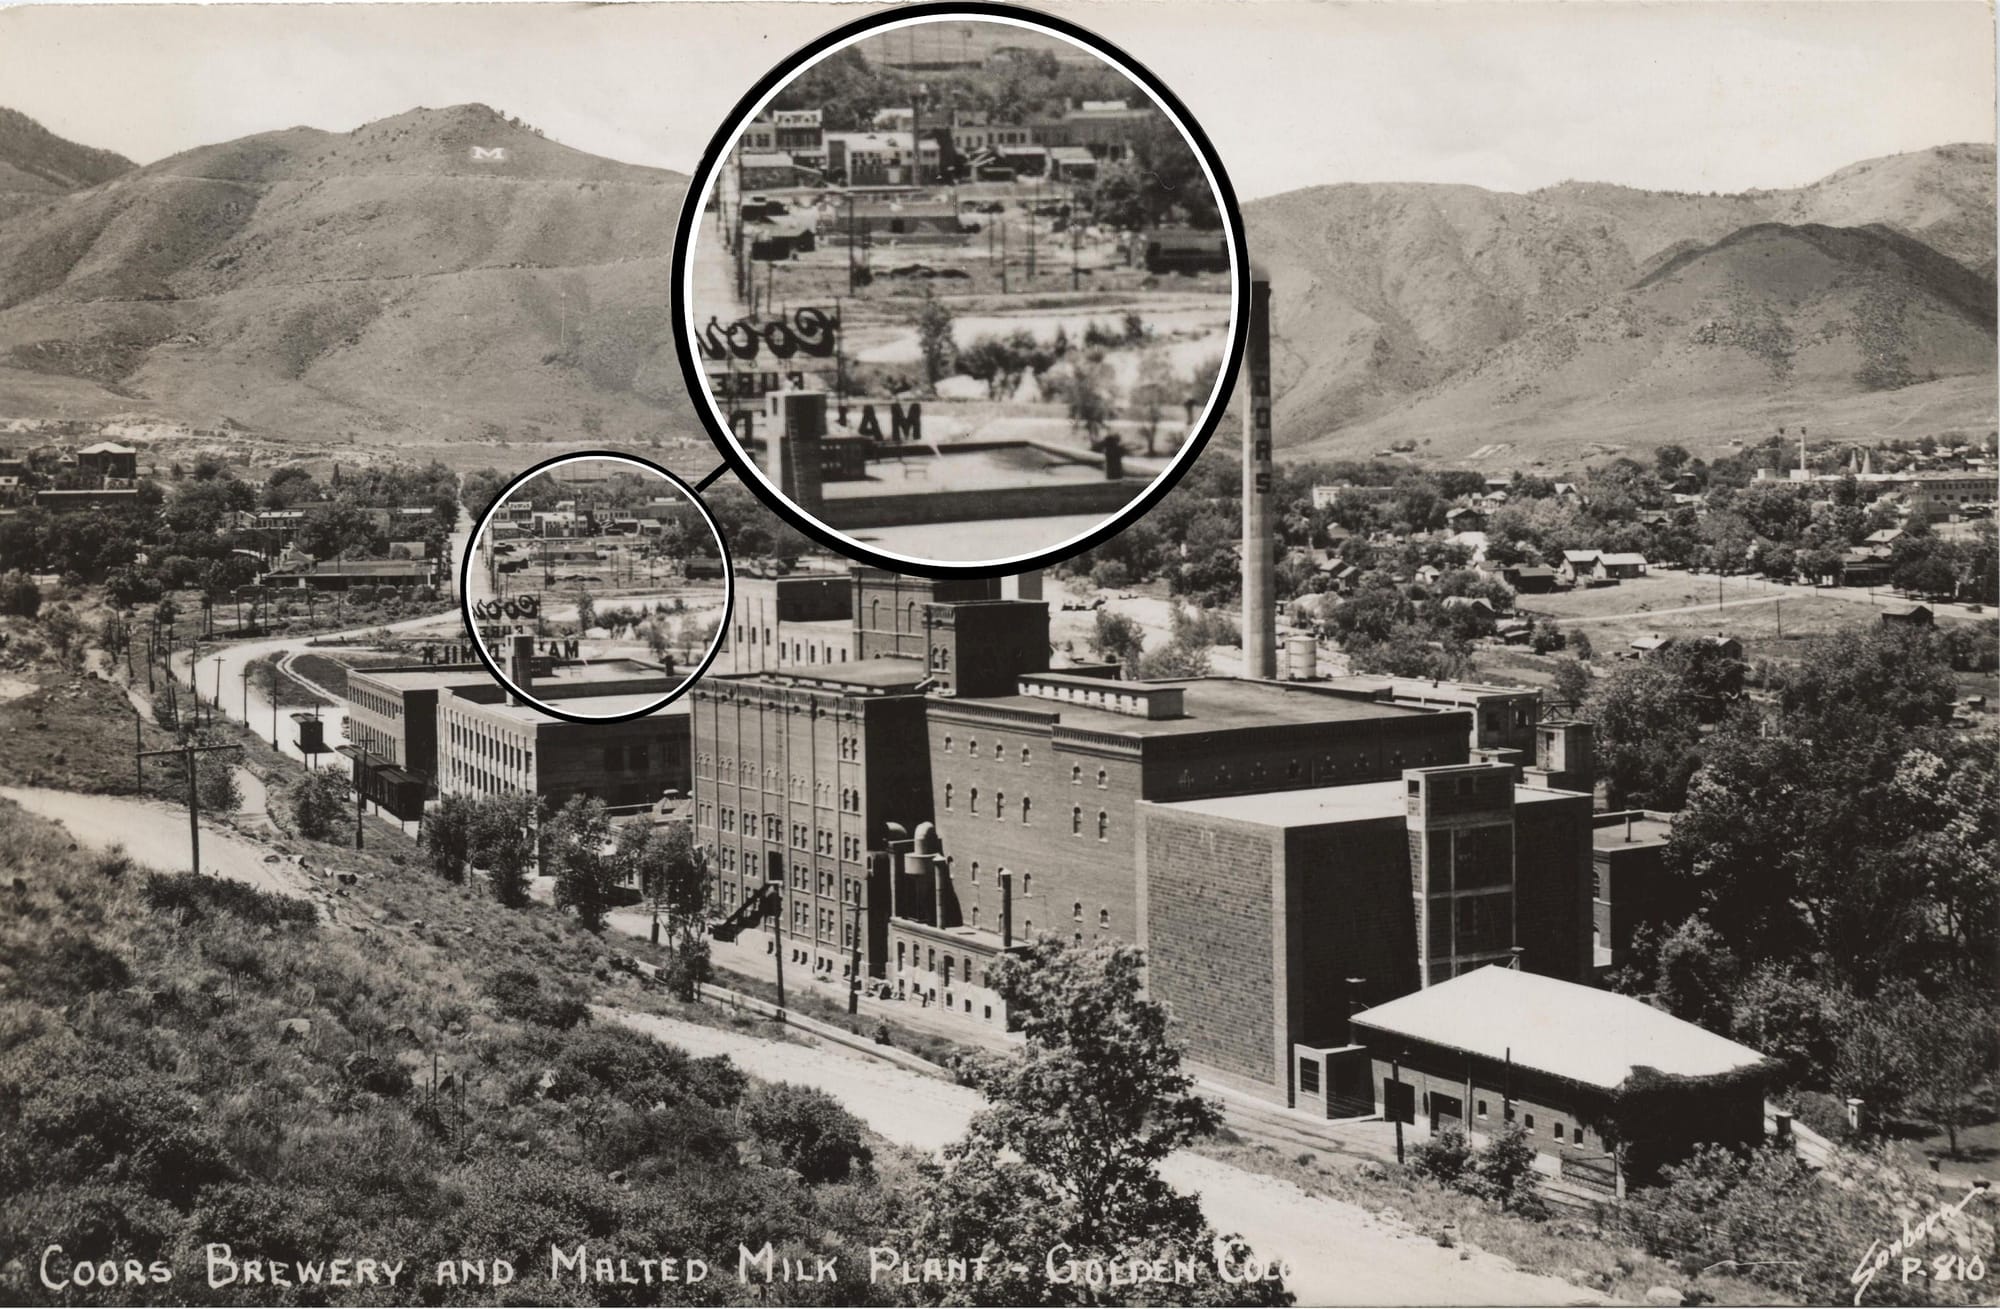 postcard of brick "Coors Brewery and Malted Milk Plant" with Golden, Mount Zion, and foothills in background